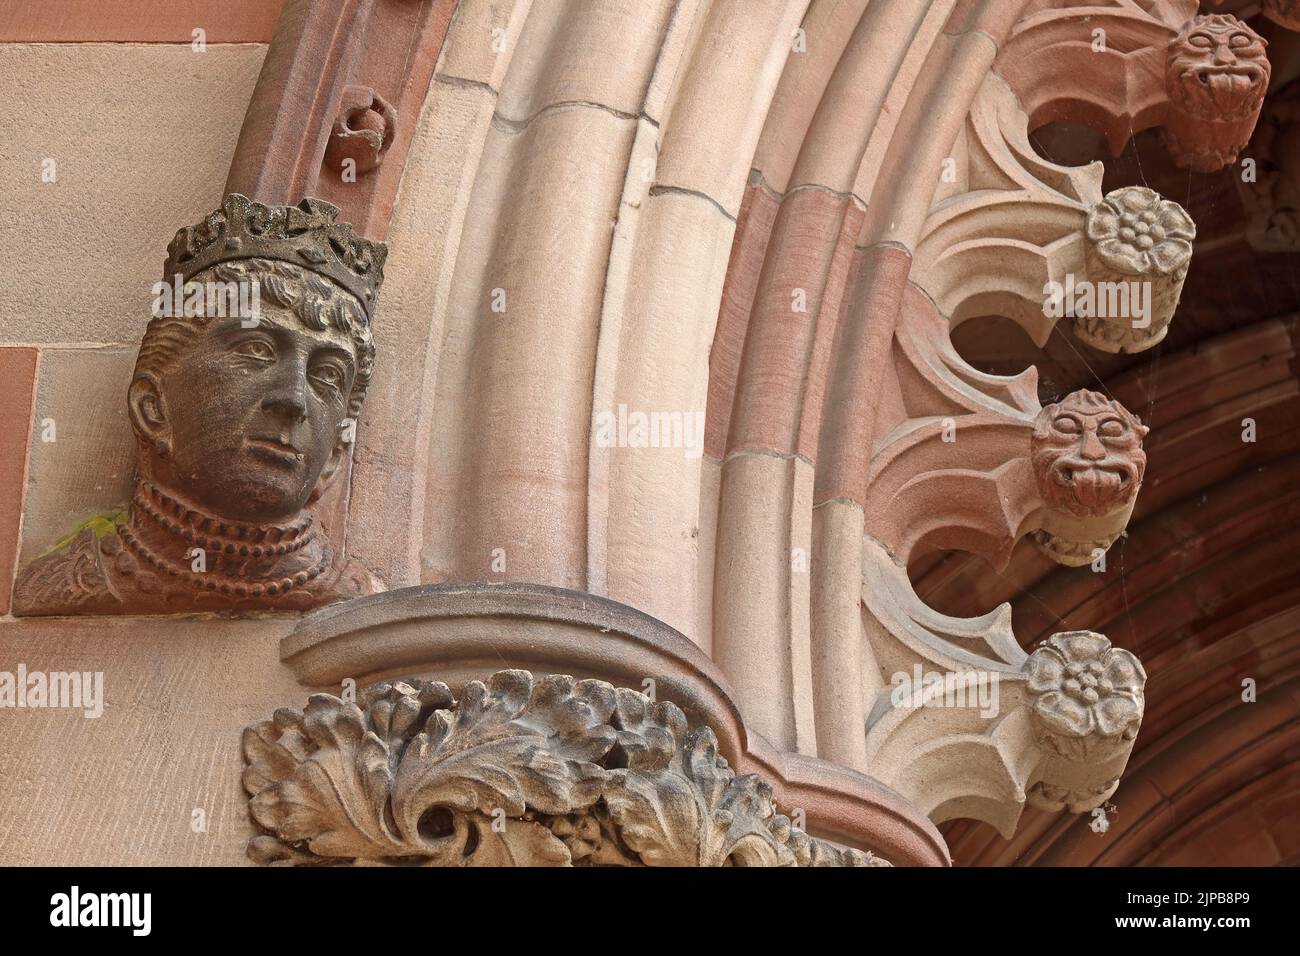 Hereford Cathedral details, Faces & gargoyle , Hereford City Centre, Herefordshire, England, UK, HR1 2NG Foto Stock